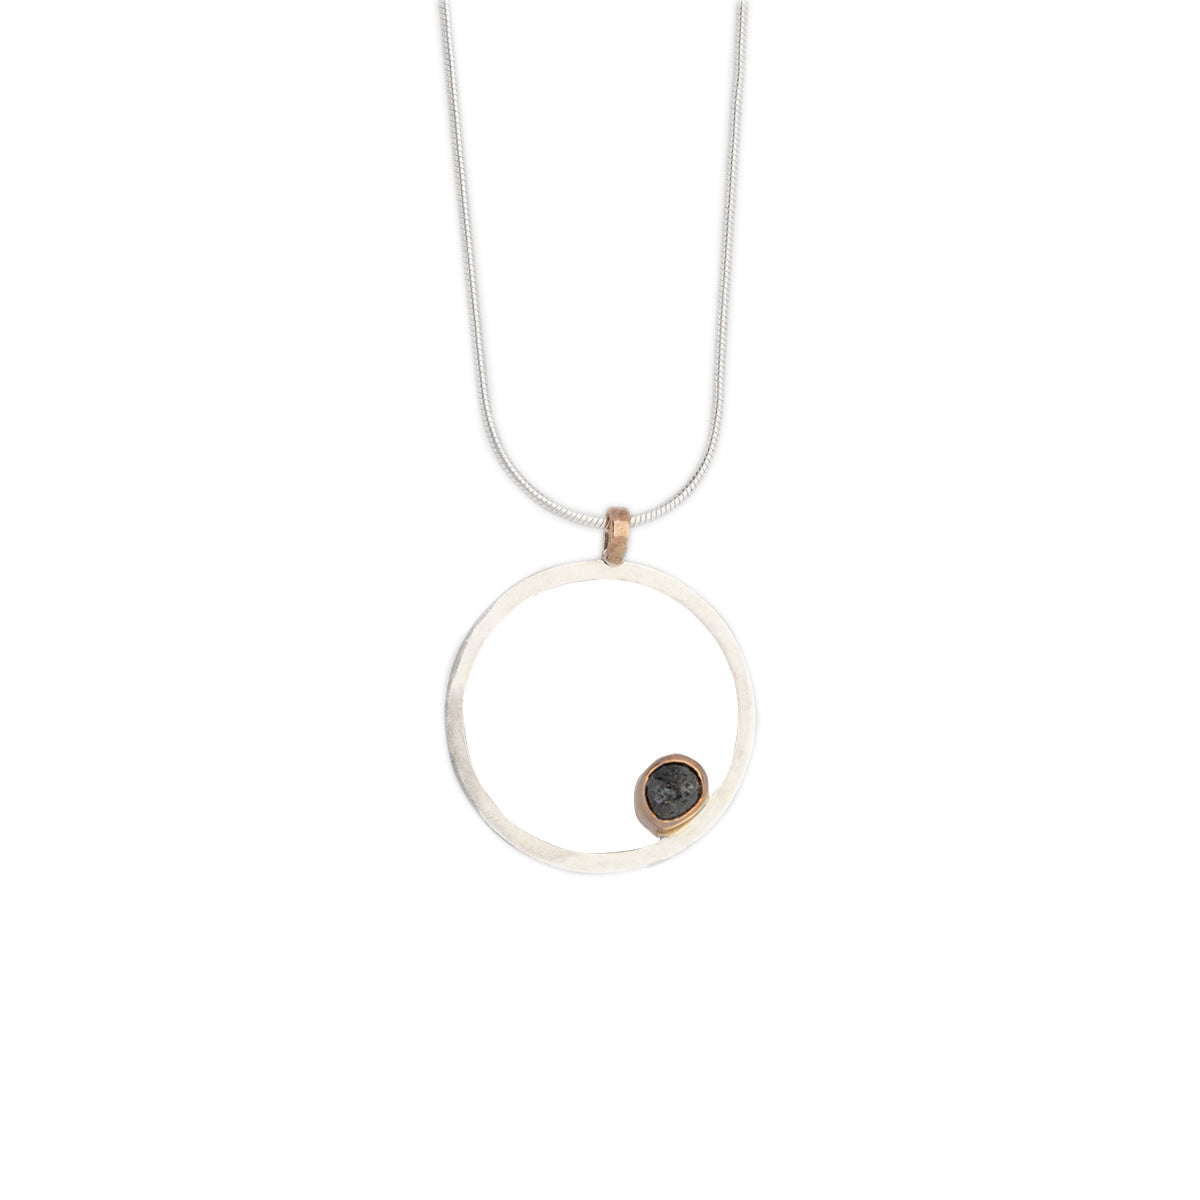 Mini .75" in Diameter Hollow Sterling Silver Circle Pendant with an off center 14k rose gold bezel for a grey rough diamond shard, rose gold bale and sterling silver chain on with background